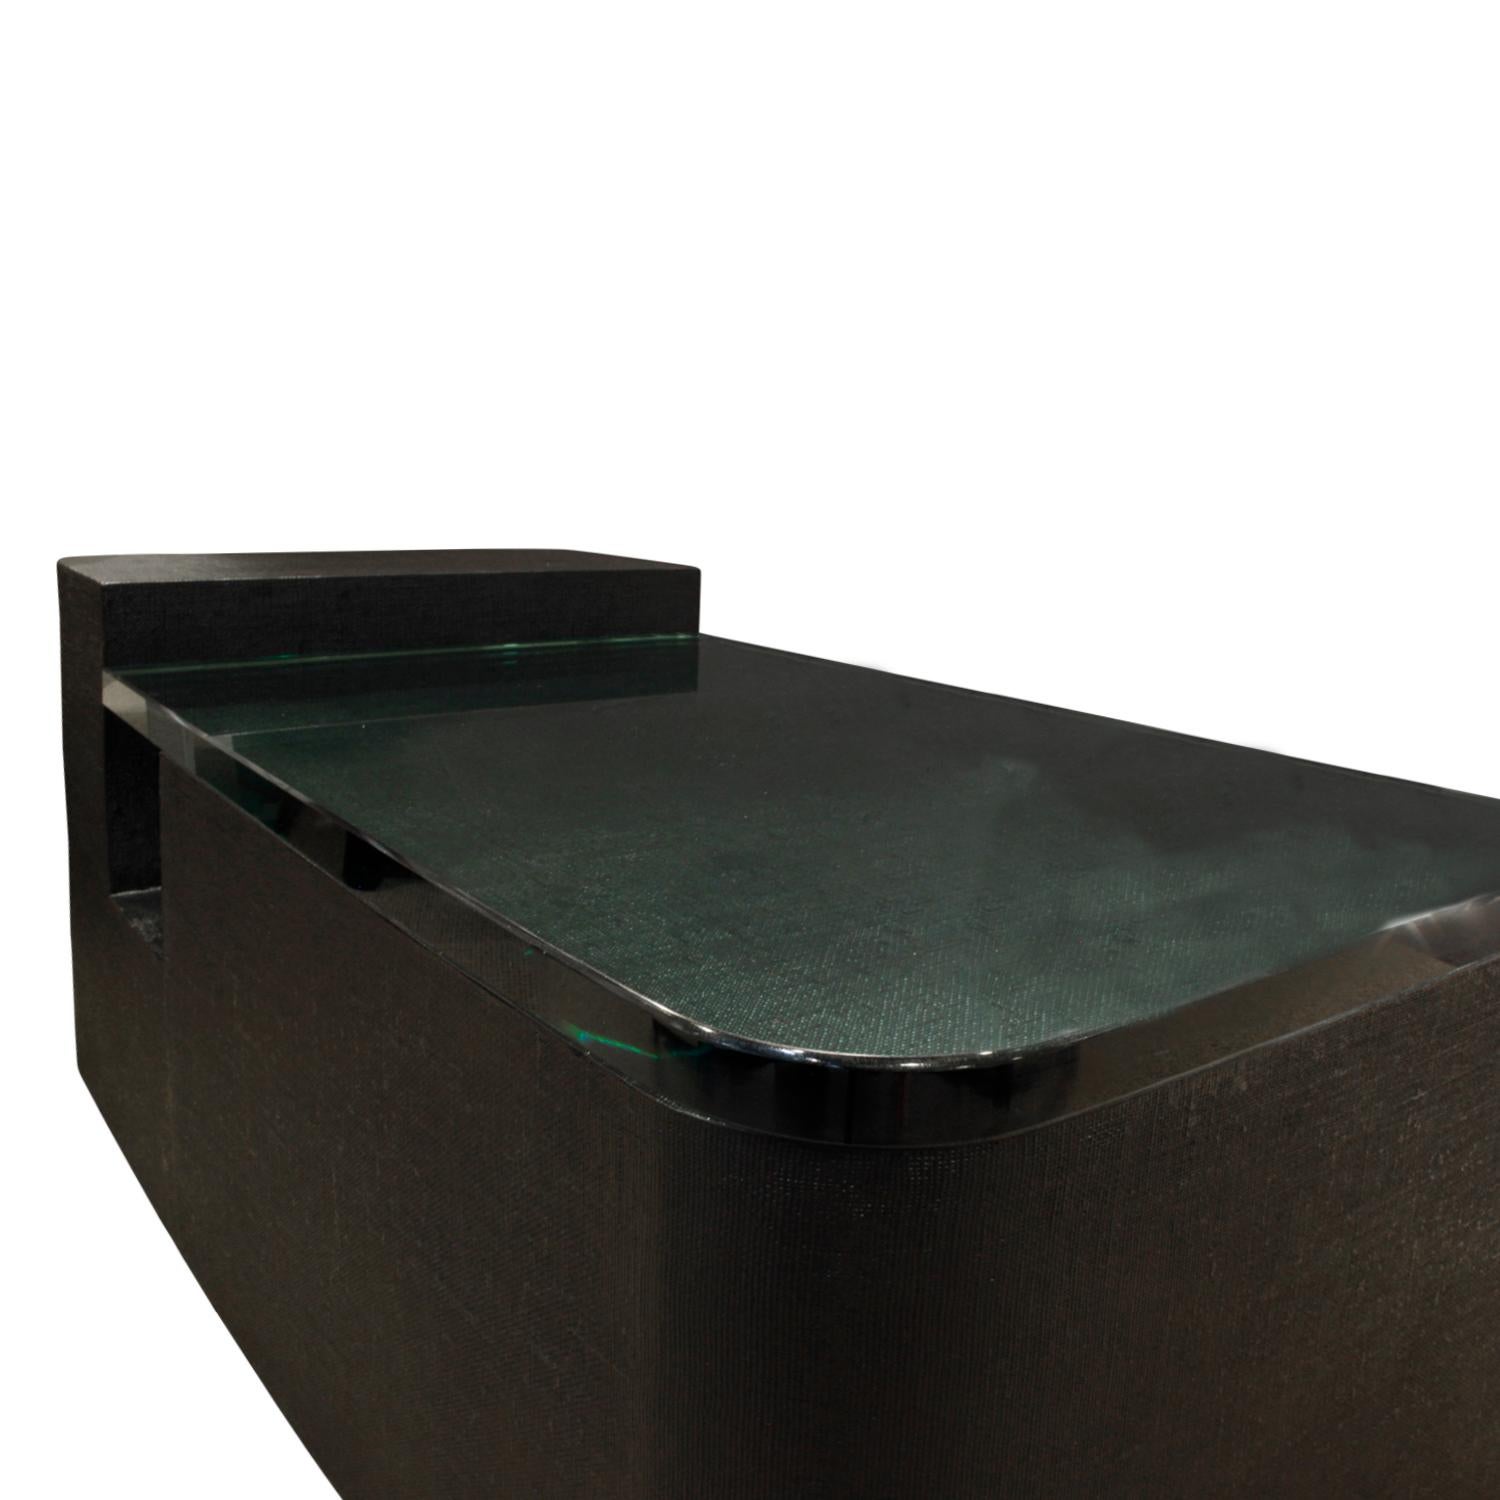 Late 20th Century Sculptural Coffee Table in Black Lacquered Linen and Glass, 1970s For Sale